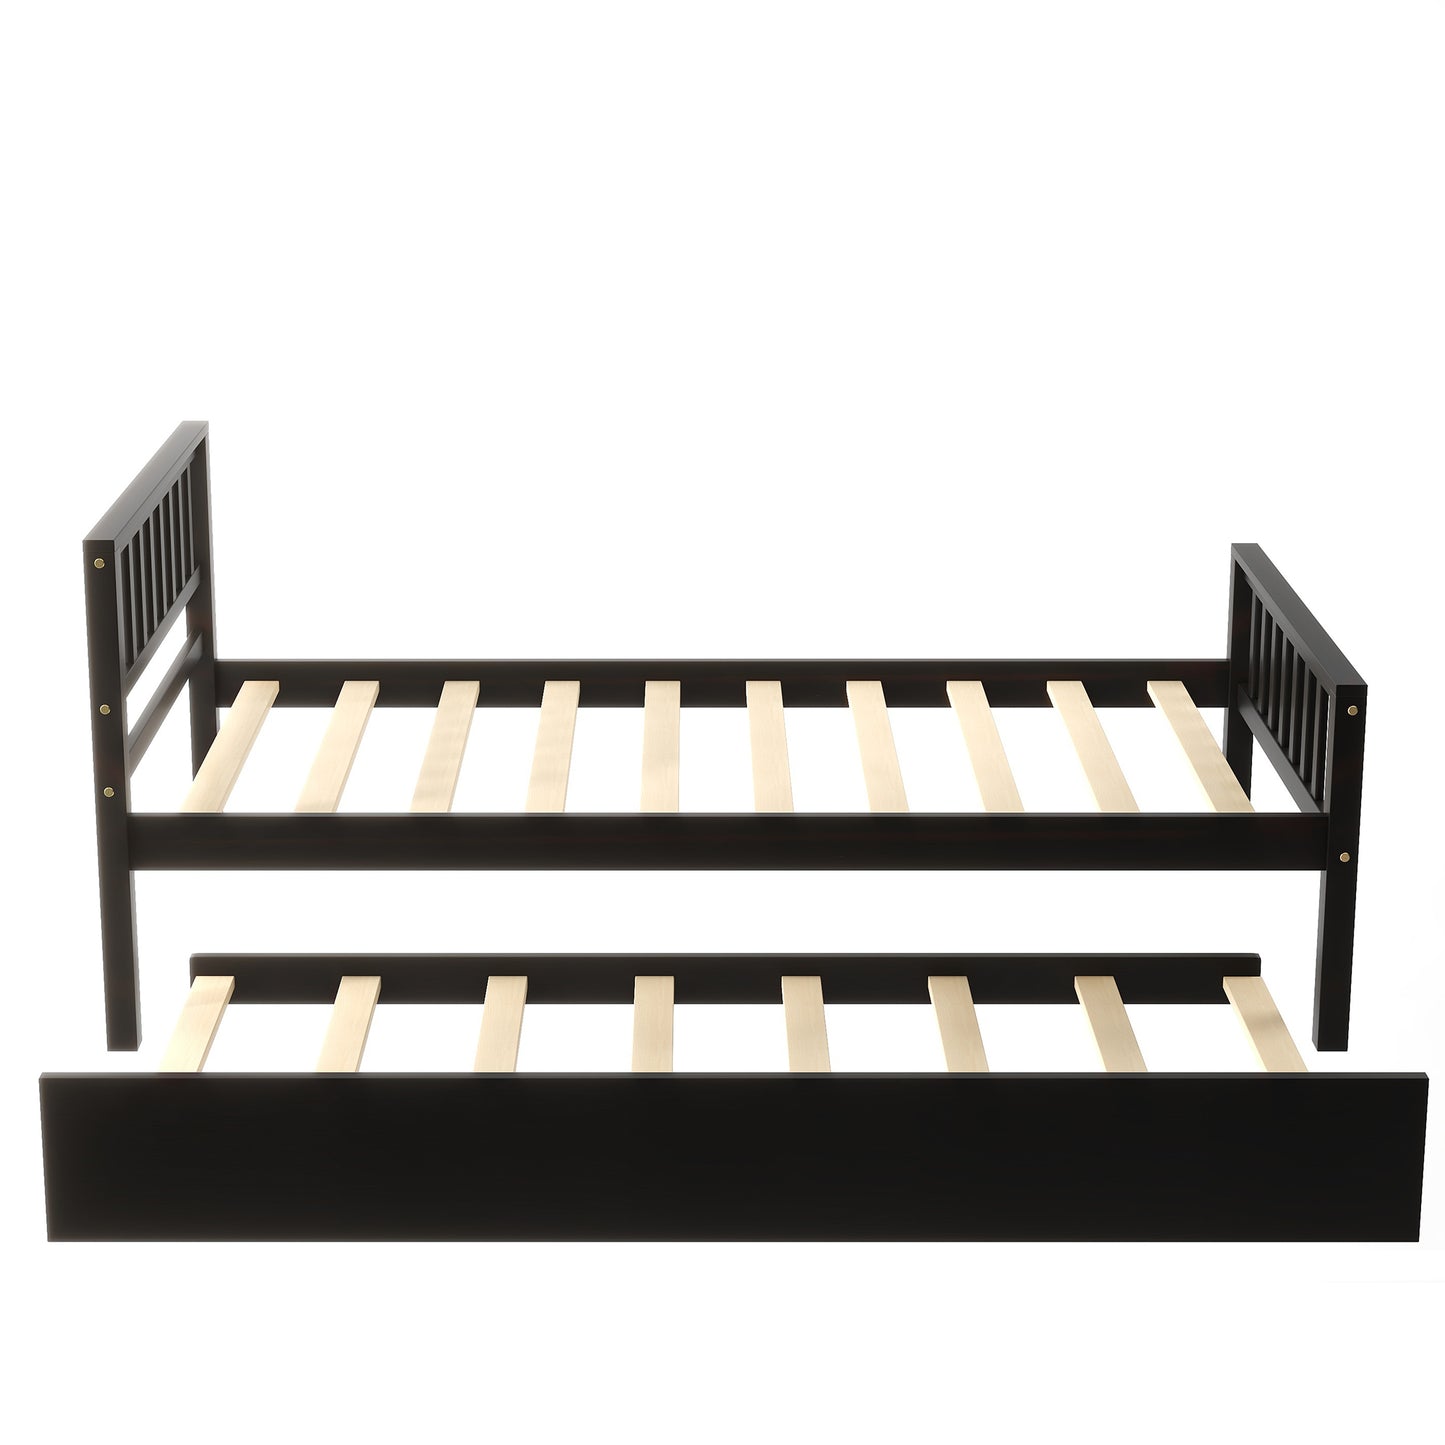 Twin Bed with Trundle, Platform Bed Frame with Headboard and Footboard, for Bedroom Small Living Space,No Box Spring Needed,Espresso